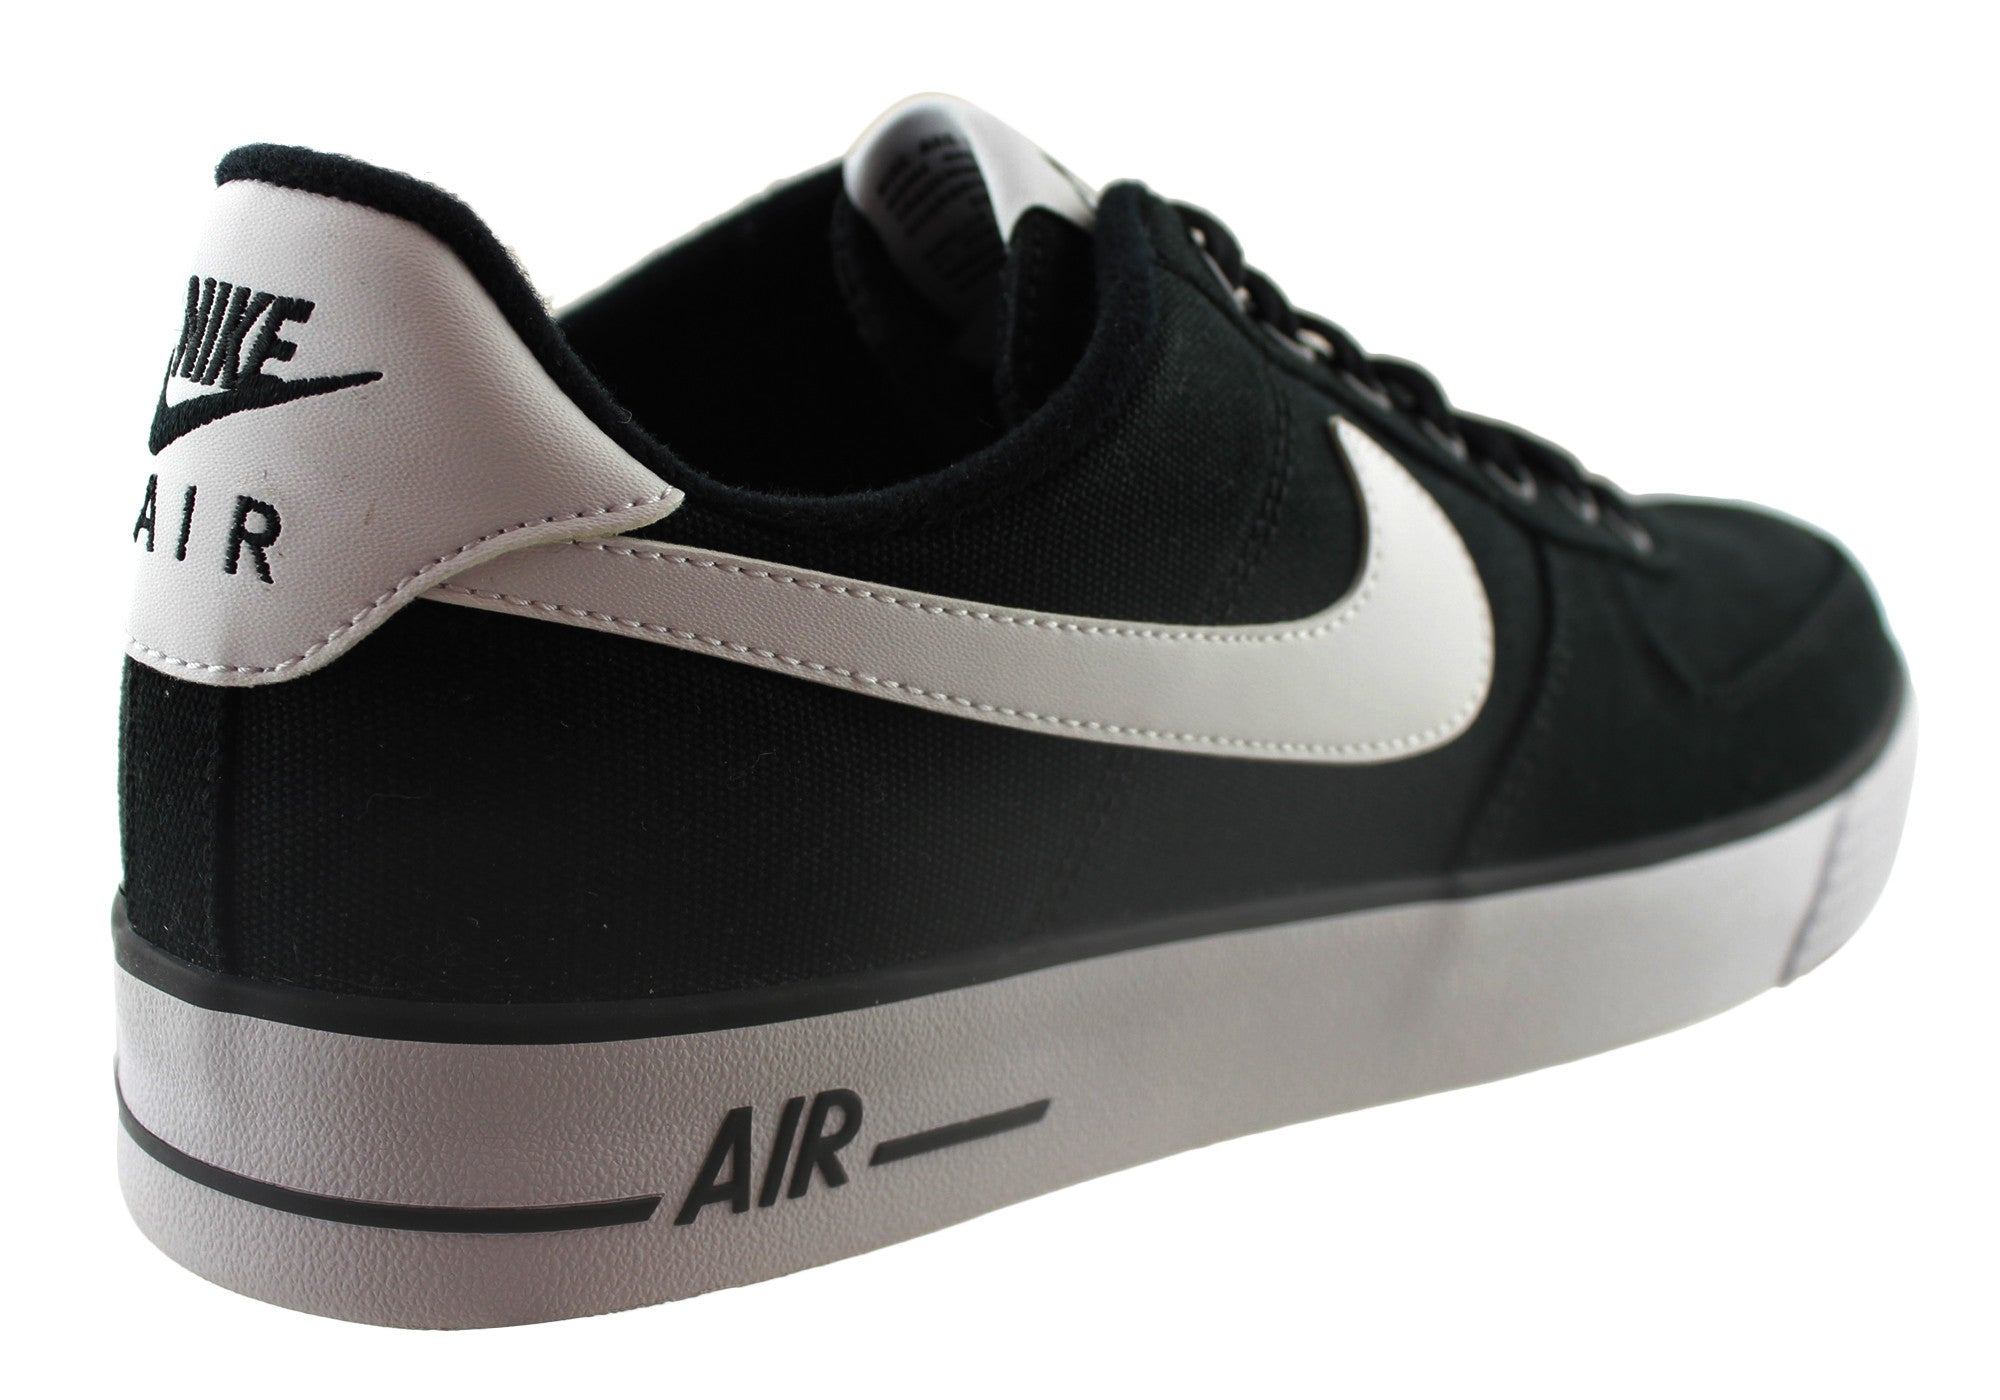 Nike Air Force 1 Ac Mens Lace Up Casual Shoes